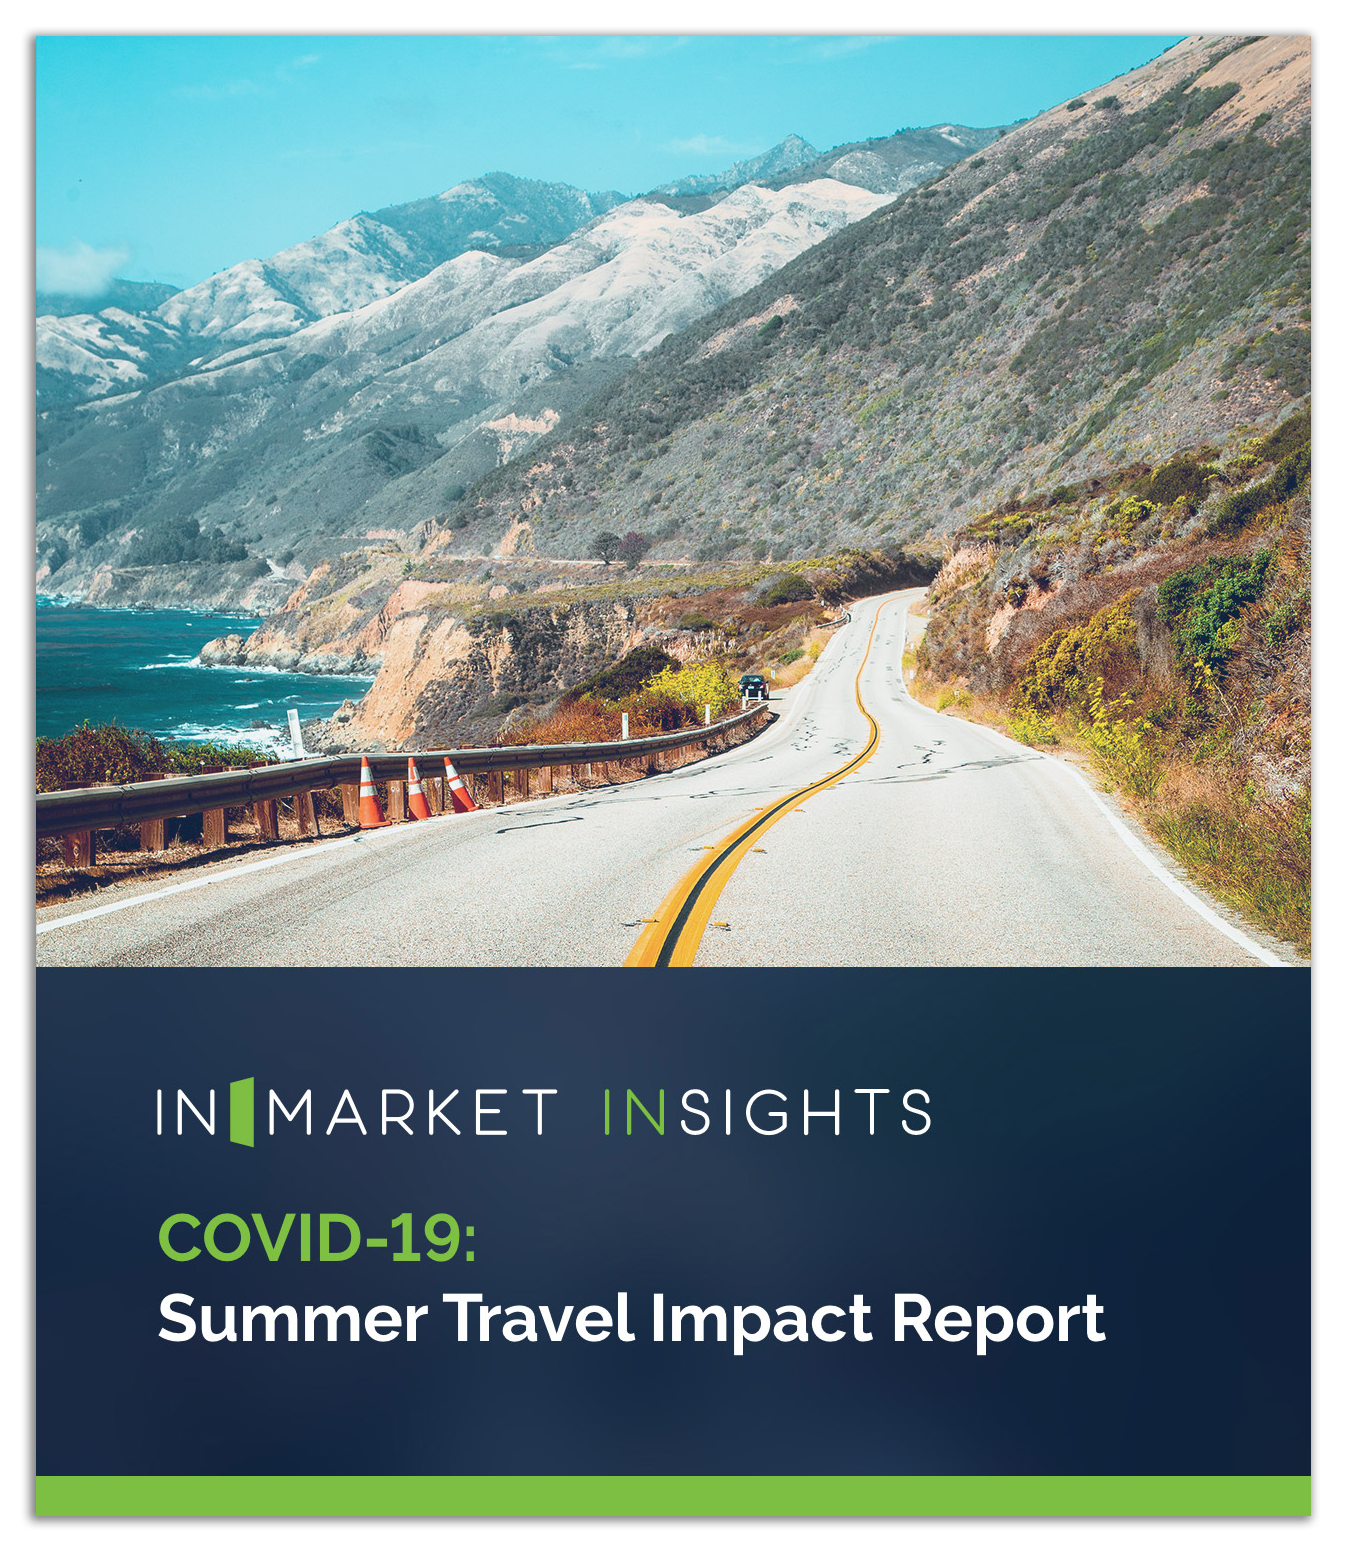 C-19 Summer Travel Impact Report Cover Photo-Shadowed